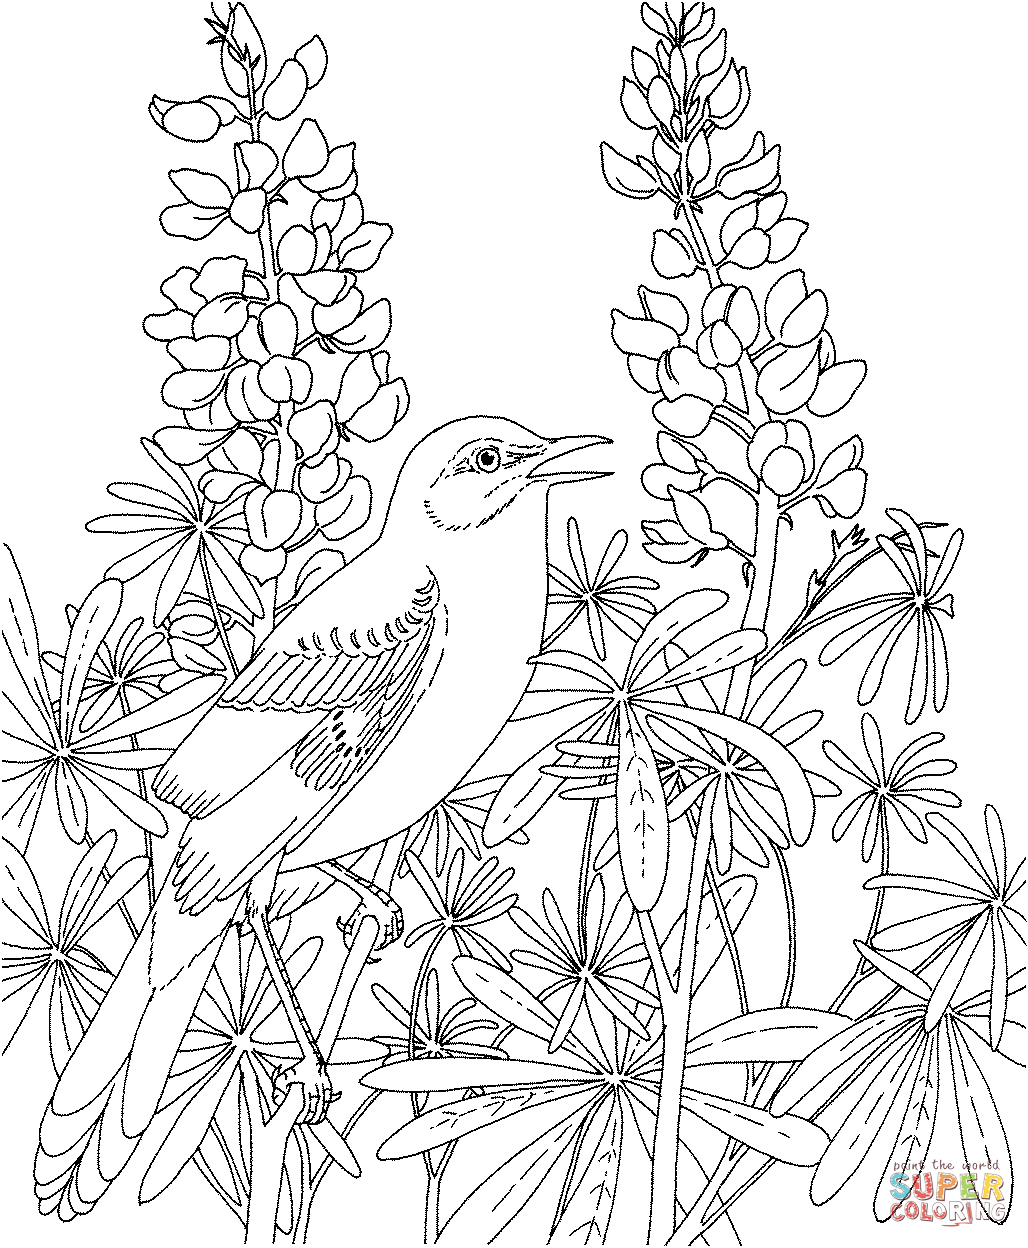 Mockingbird and Bluebonnet Texas State Bird and Flower | Bird coloring pages,  Flower coloring pages, Garden coloring pages